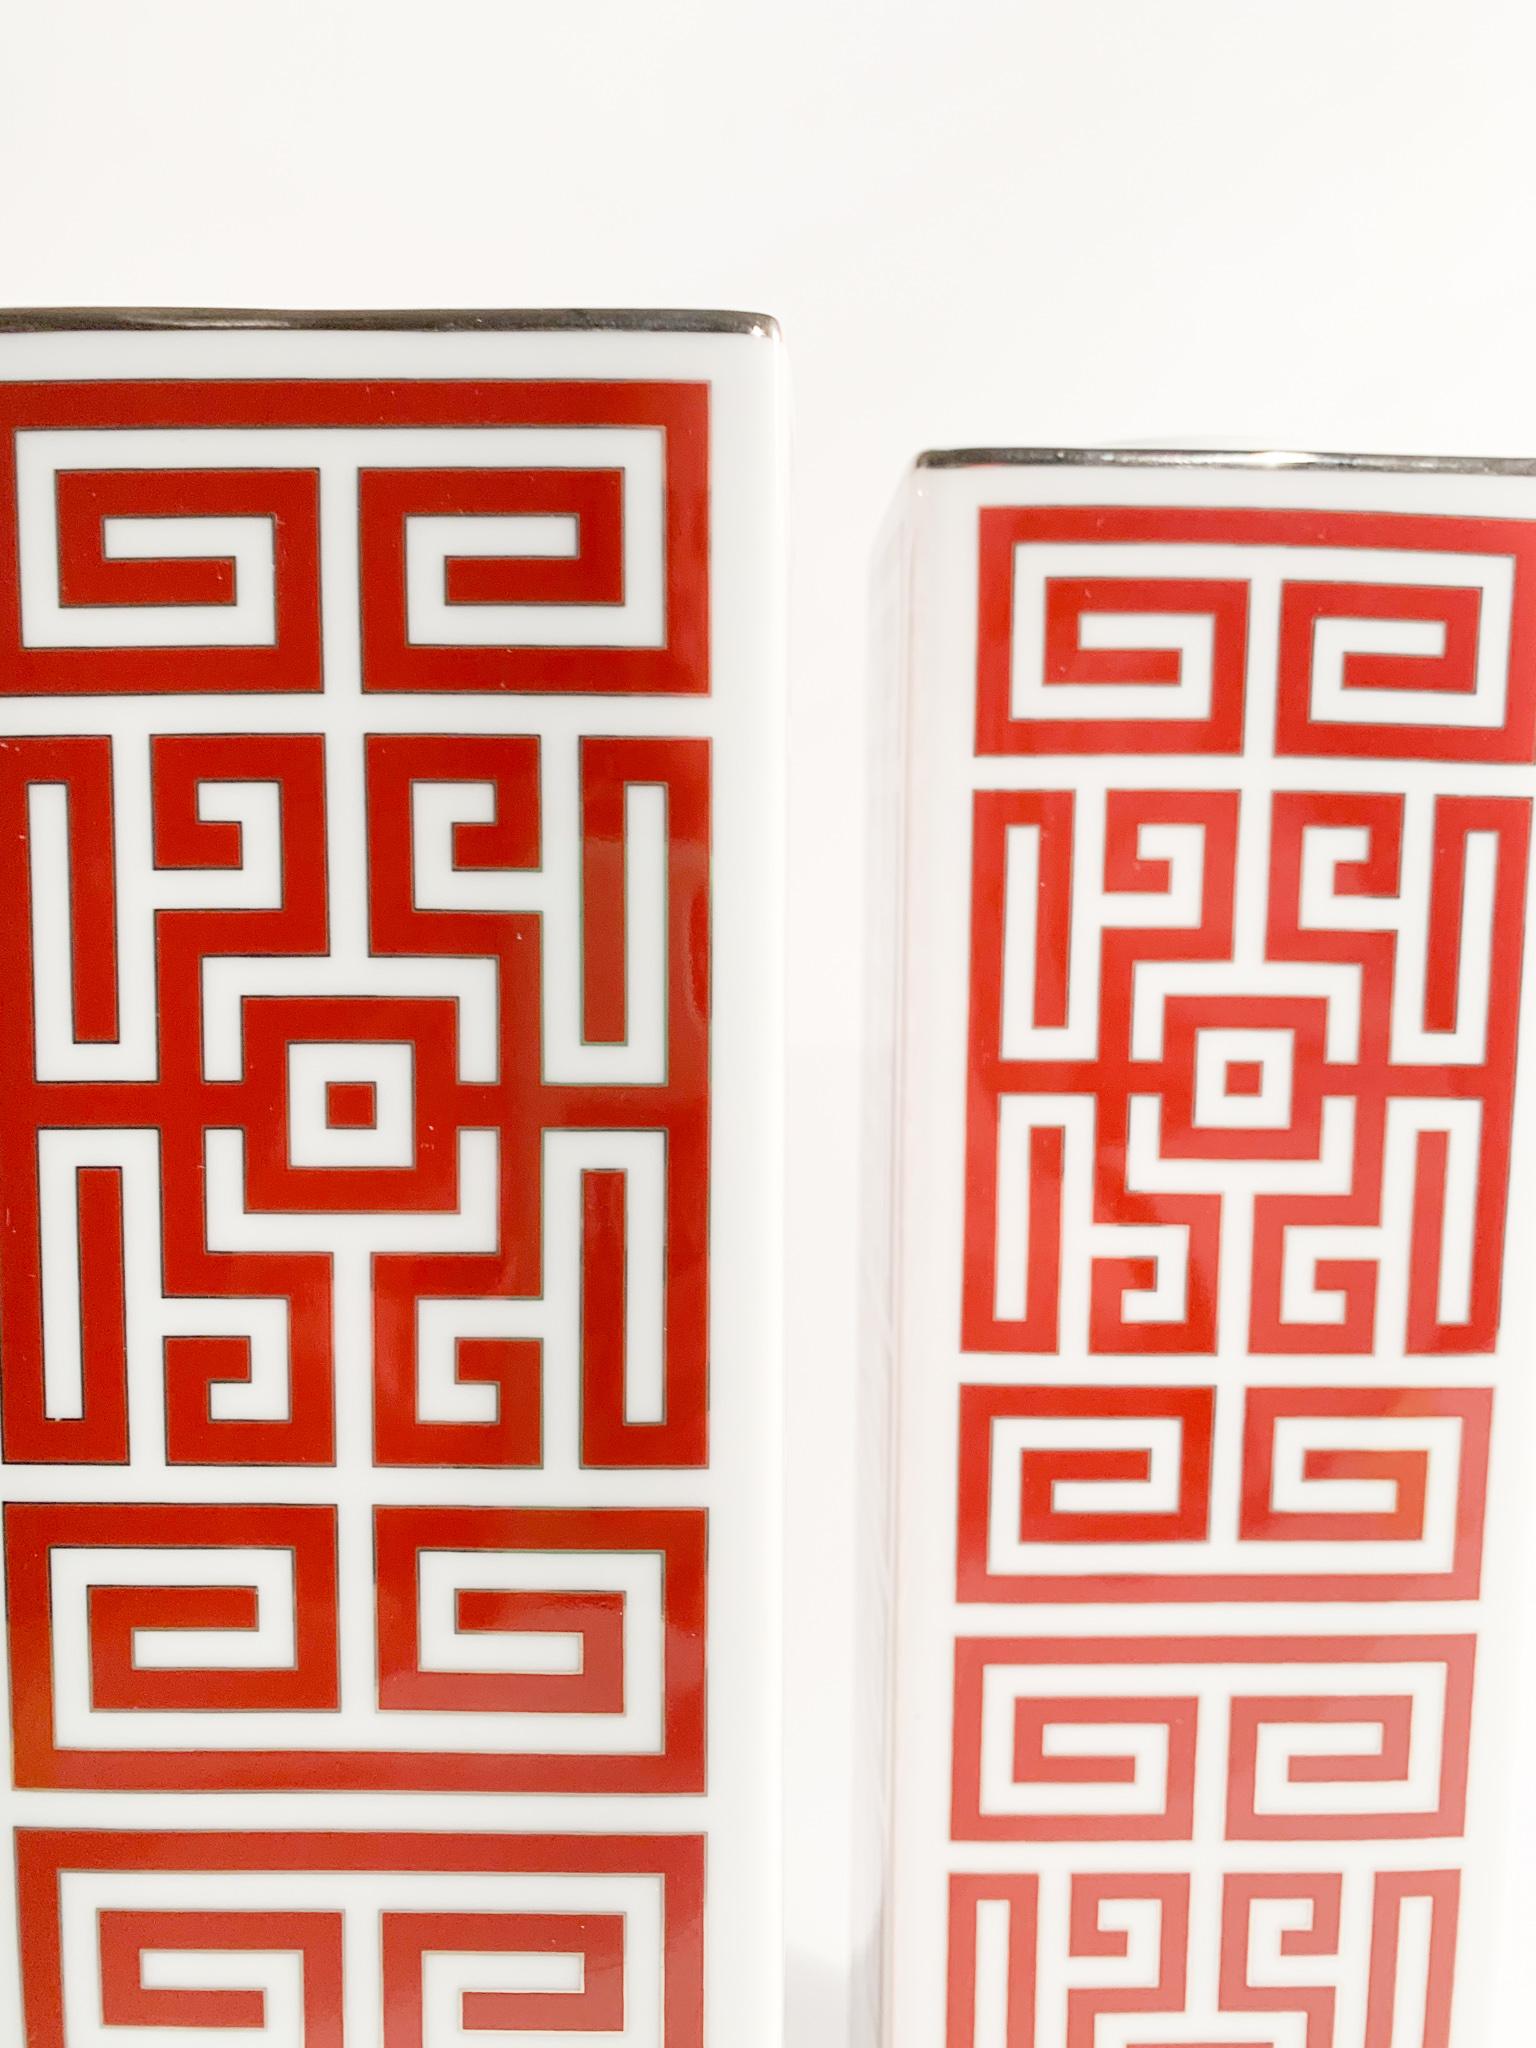 Late 20th Century Pair of Gio Ponti Red Labyrinth Vases Re-edition by Richard Ginori